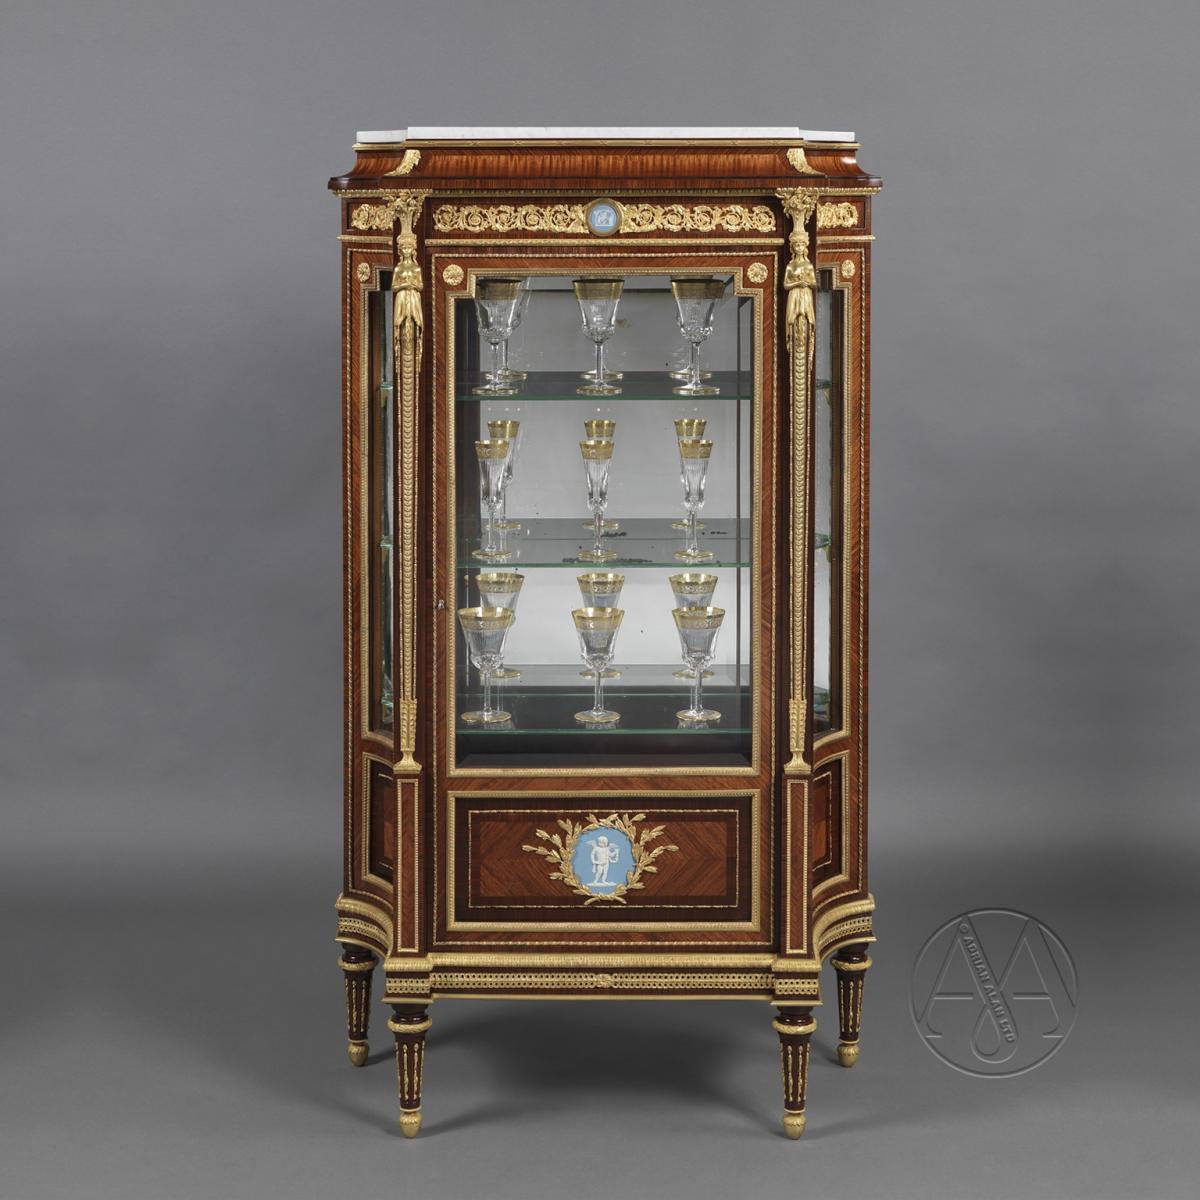 One from An Important Pair of Louis XVI Style Vitrines by Joseph-Emmanuel Zwiener